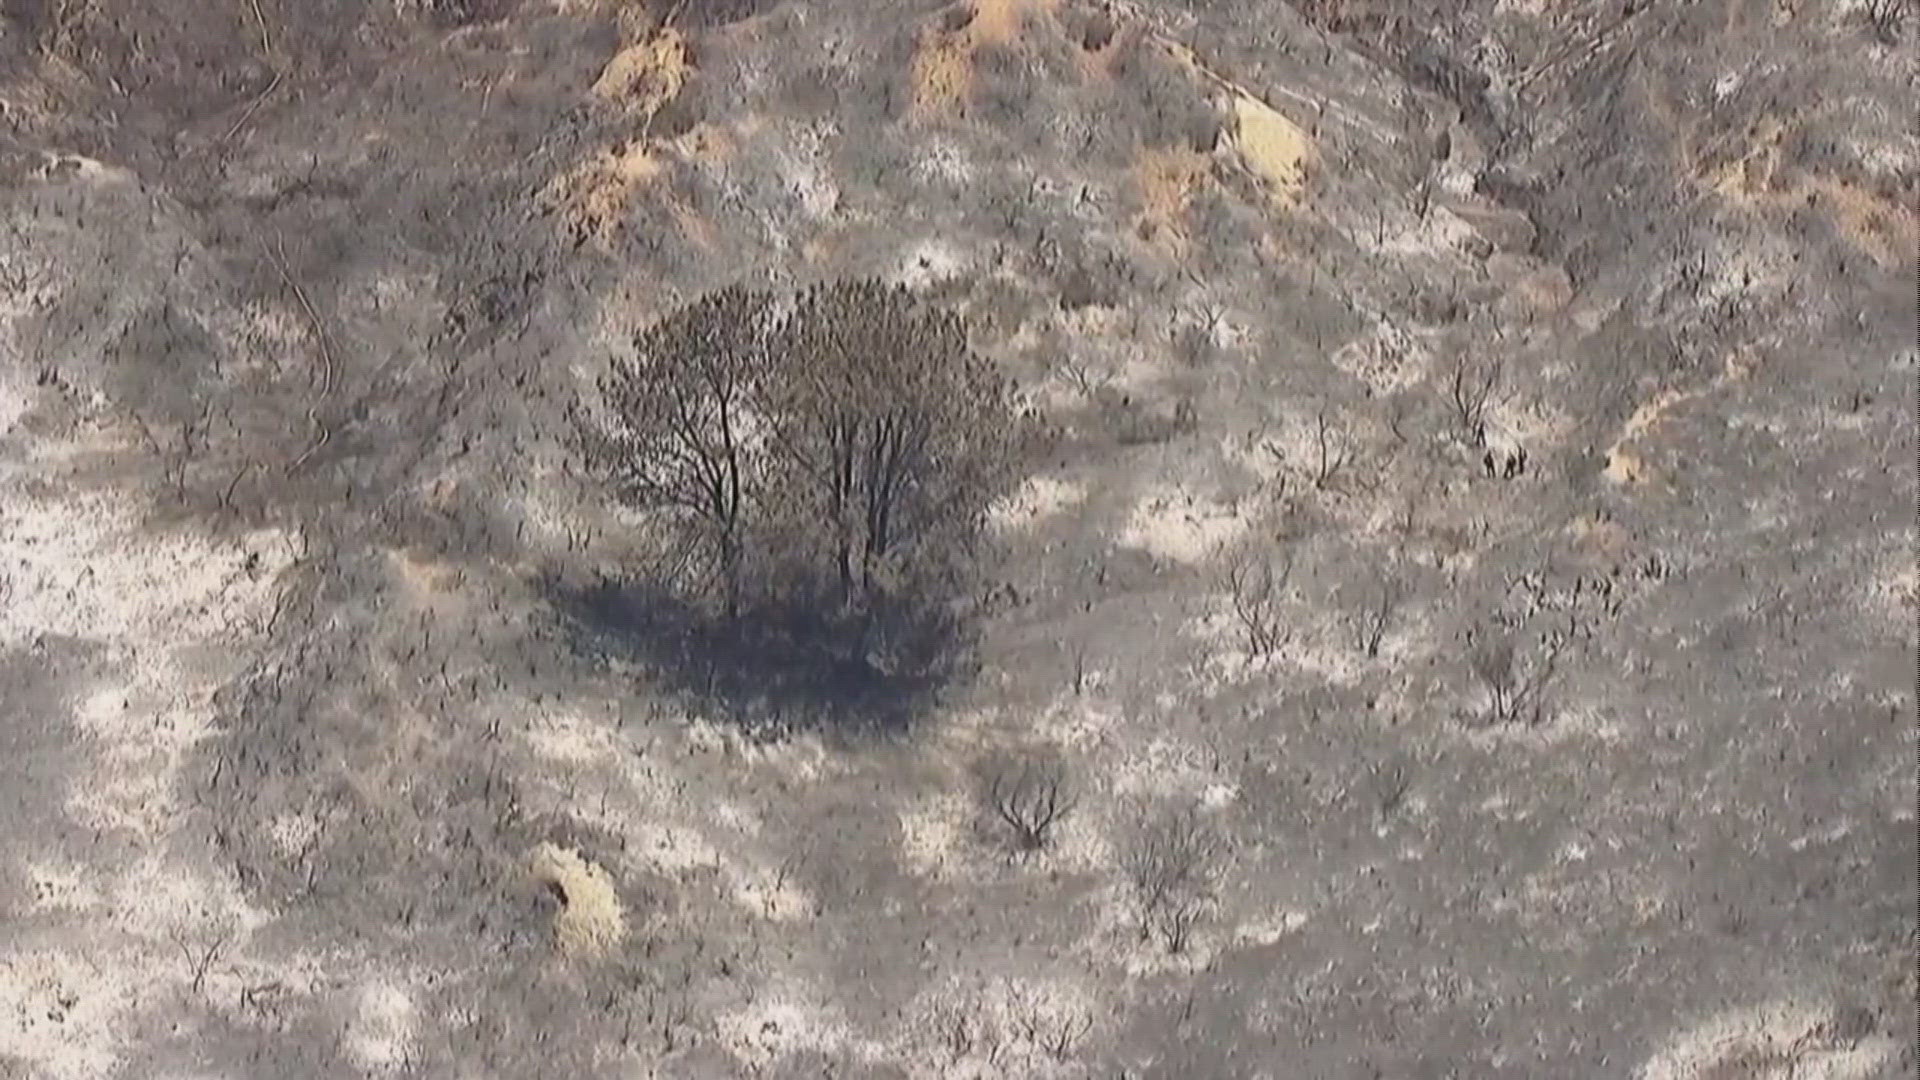 Chopper 8 returns to Del Mar one day after a brush fire erupted, threatening homes and prompting evacuations.